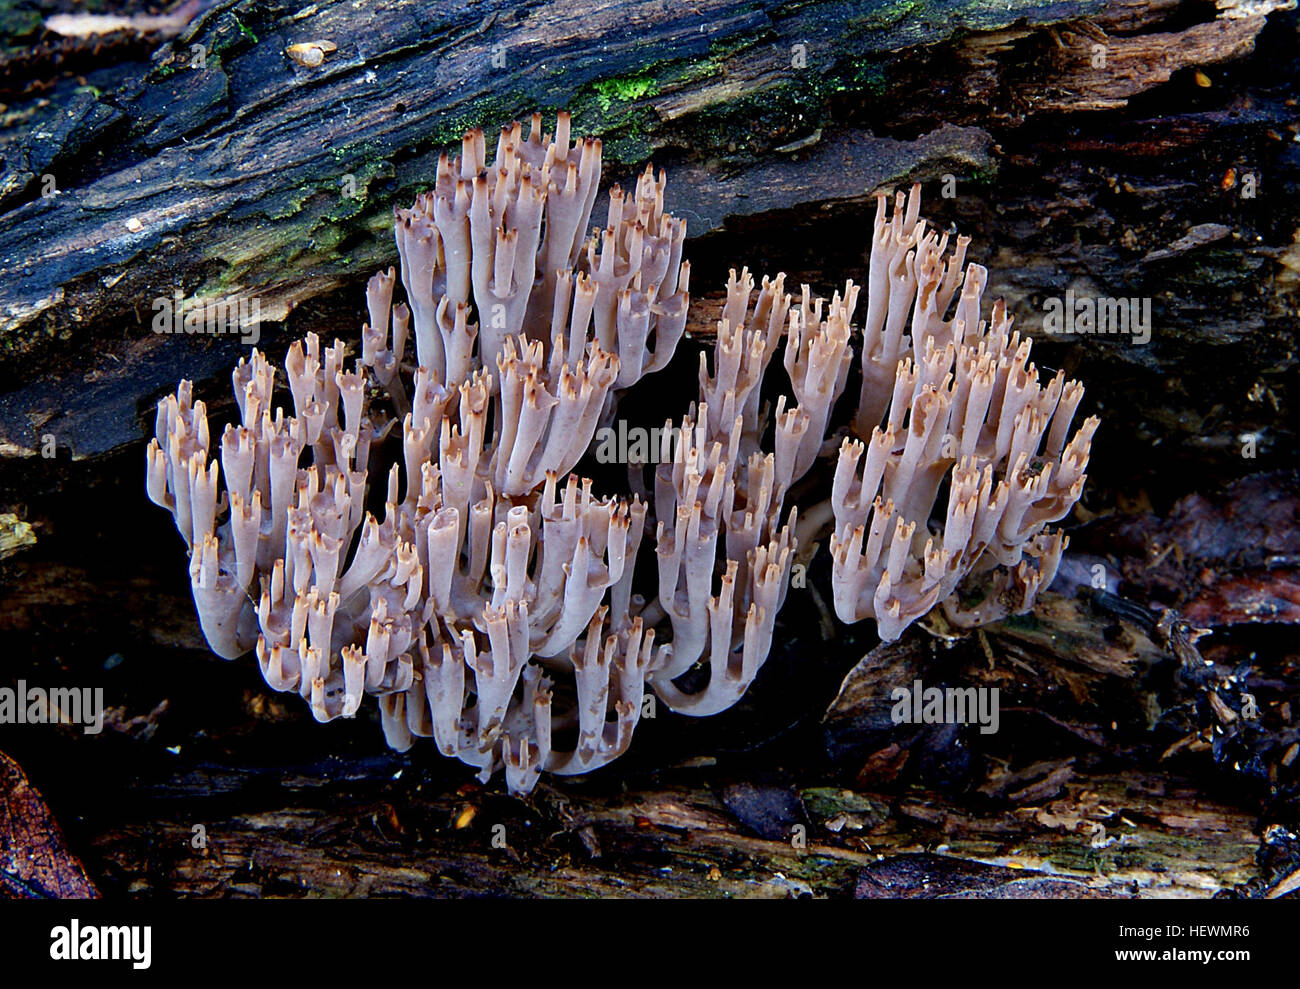 Grows on well rotted wood in groups. Coral-like in form often running down the length of wood. Has a much tighter upright form compared to the other similar species.  Common name: None Found: Native Forest Substrate: Wood Spore: WhiteHeight: 80mm Width: 3 mm Season: Autumn Edible: No Stock Photo